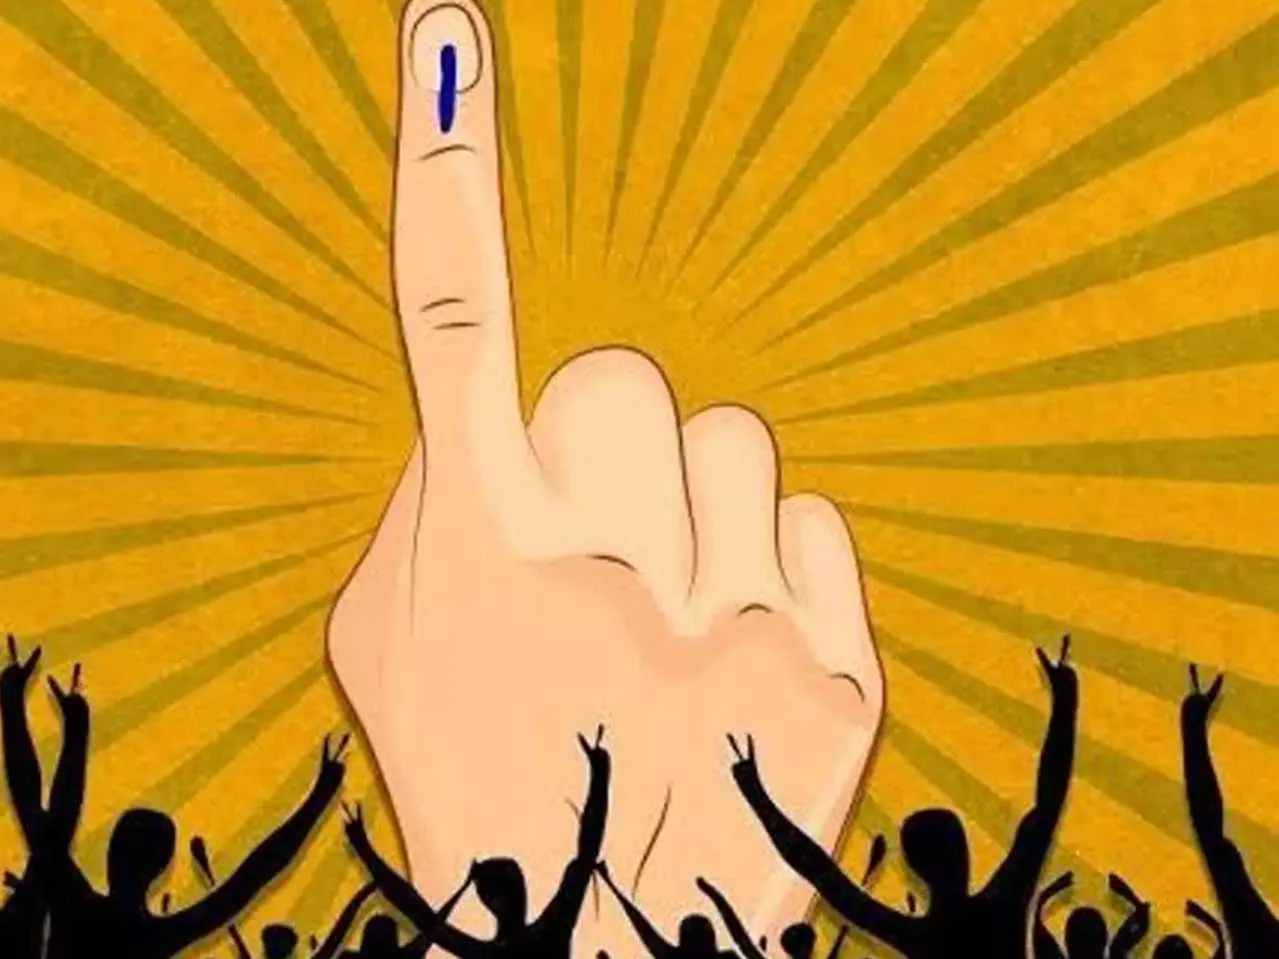 Finger with voting mark cartoon image